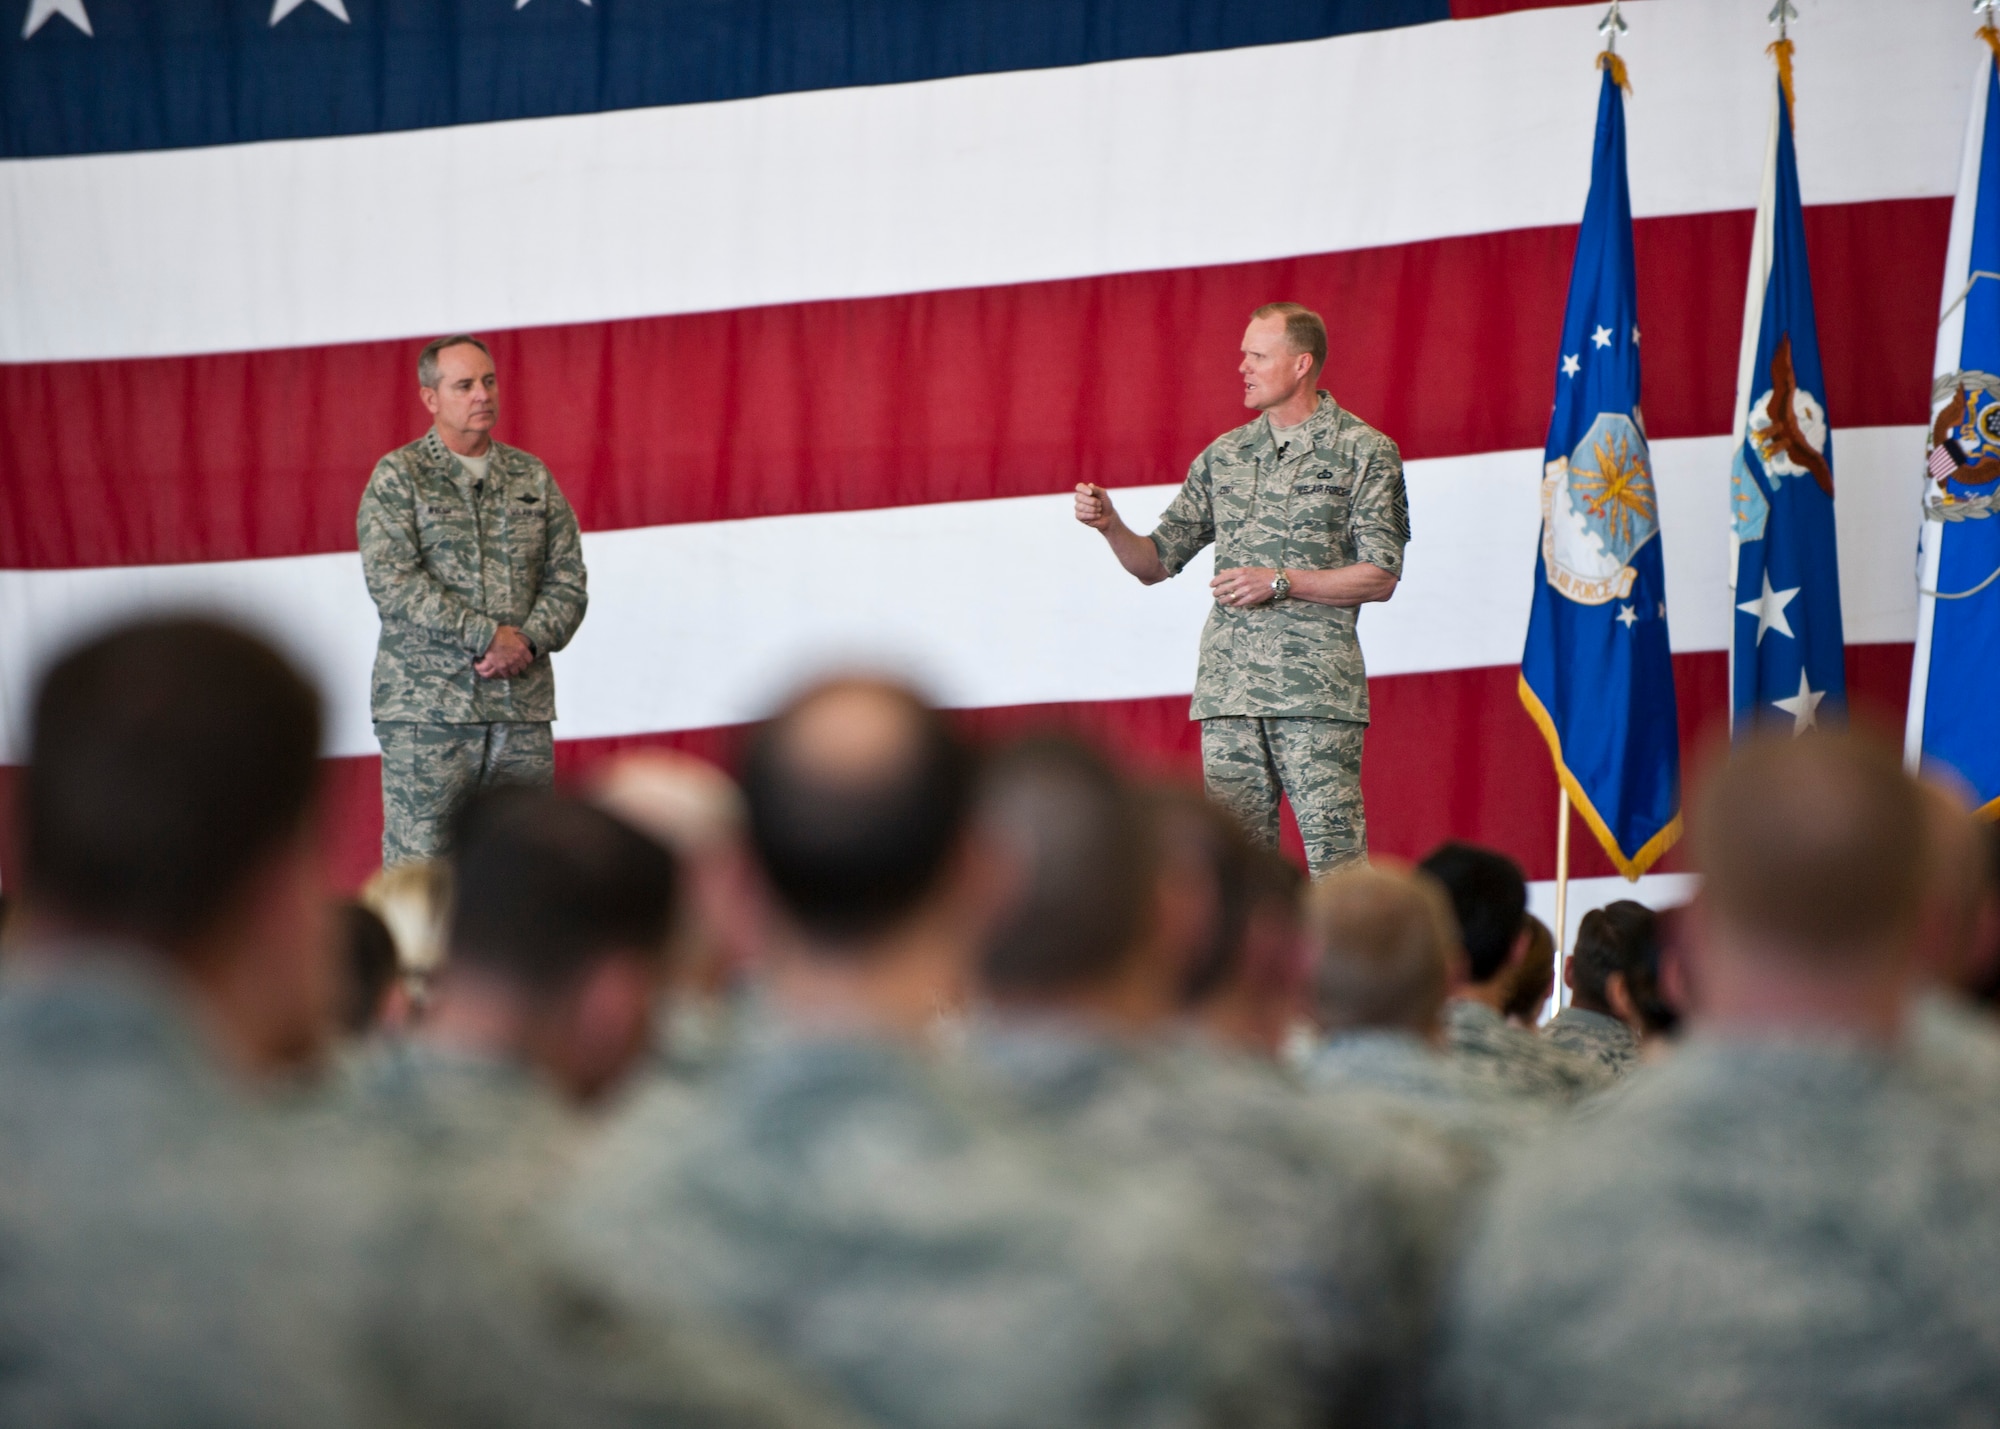 Chief Master Sgt. of the Air Force James A. Cody speaks to Airmen April 7, 2014 during a town-hall style meeting at Nellis Air Force Base, Nev. Cody, along with Air Force Chief of Staff Gen. Mark A. Welsh III, and their spouses, Athena and Betty, visited Nellis to receive an update on the mission and thank Airmen and their families for their sacrifice and service. (U.S. Air Force photo by Senior Airman Jason Couillard)